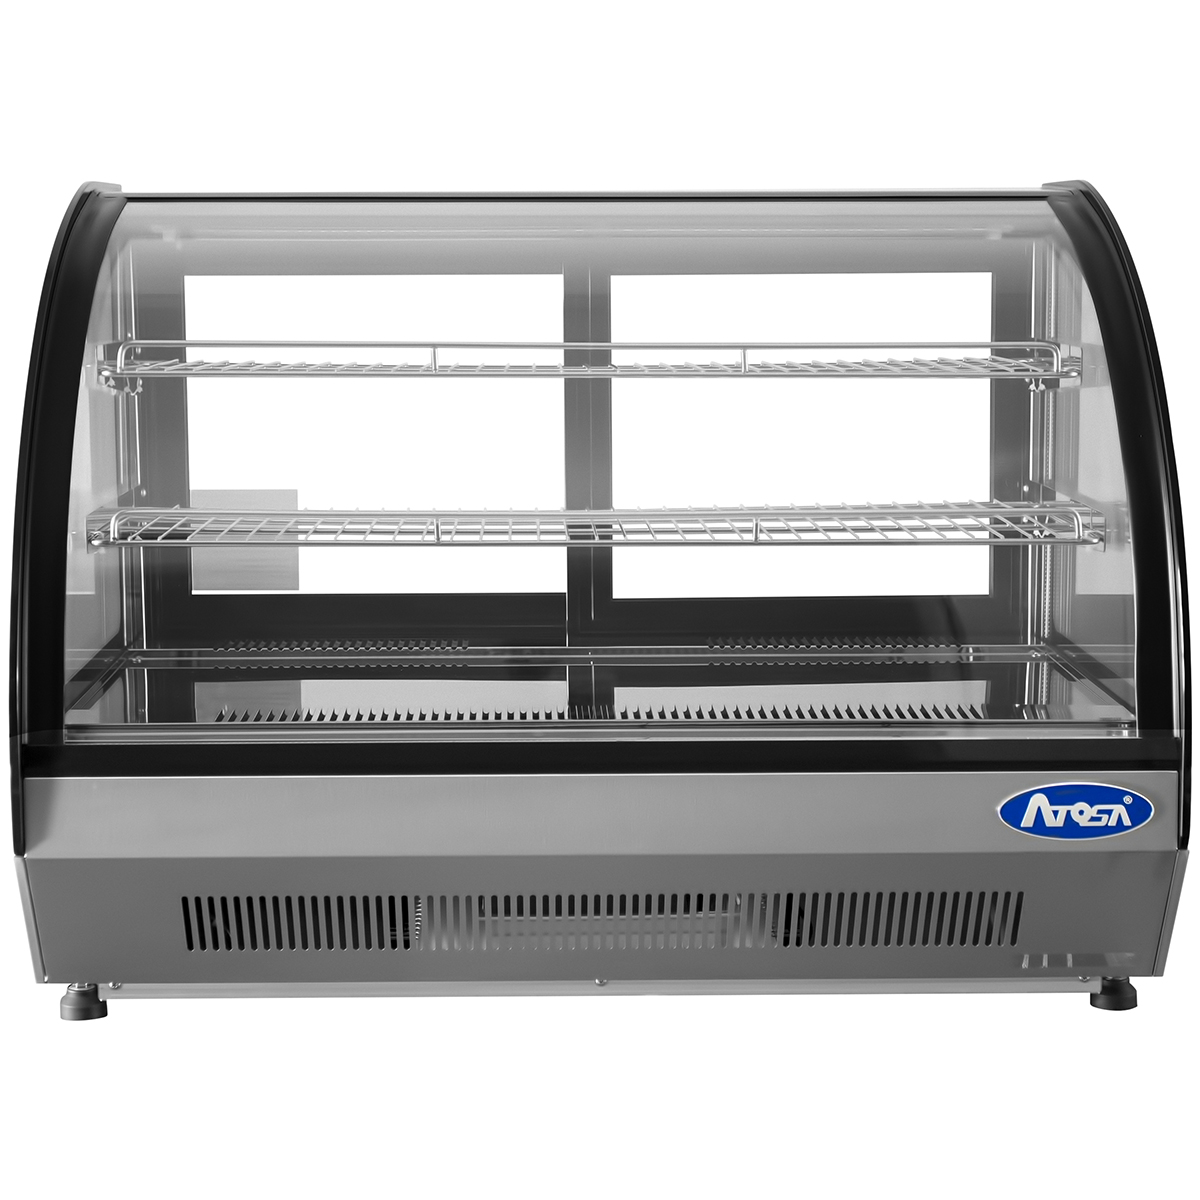 Atosa CRDC-46 Refrigerated Countertop Display Case, 4.6 cu.ft. - 35-2/5"W x 22-1/10"D x 26-2/5"H